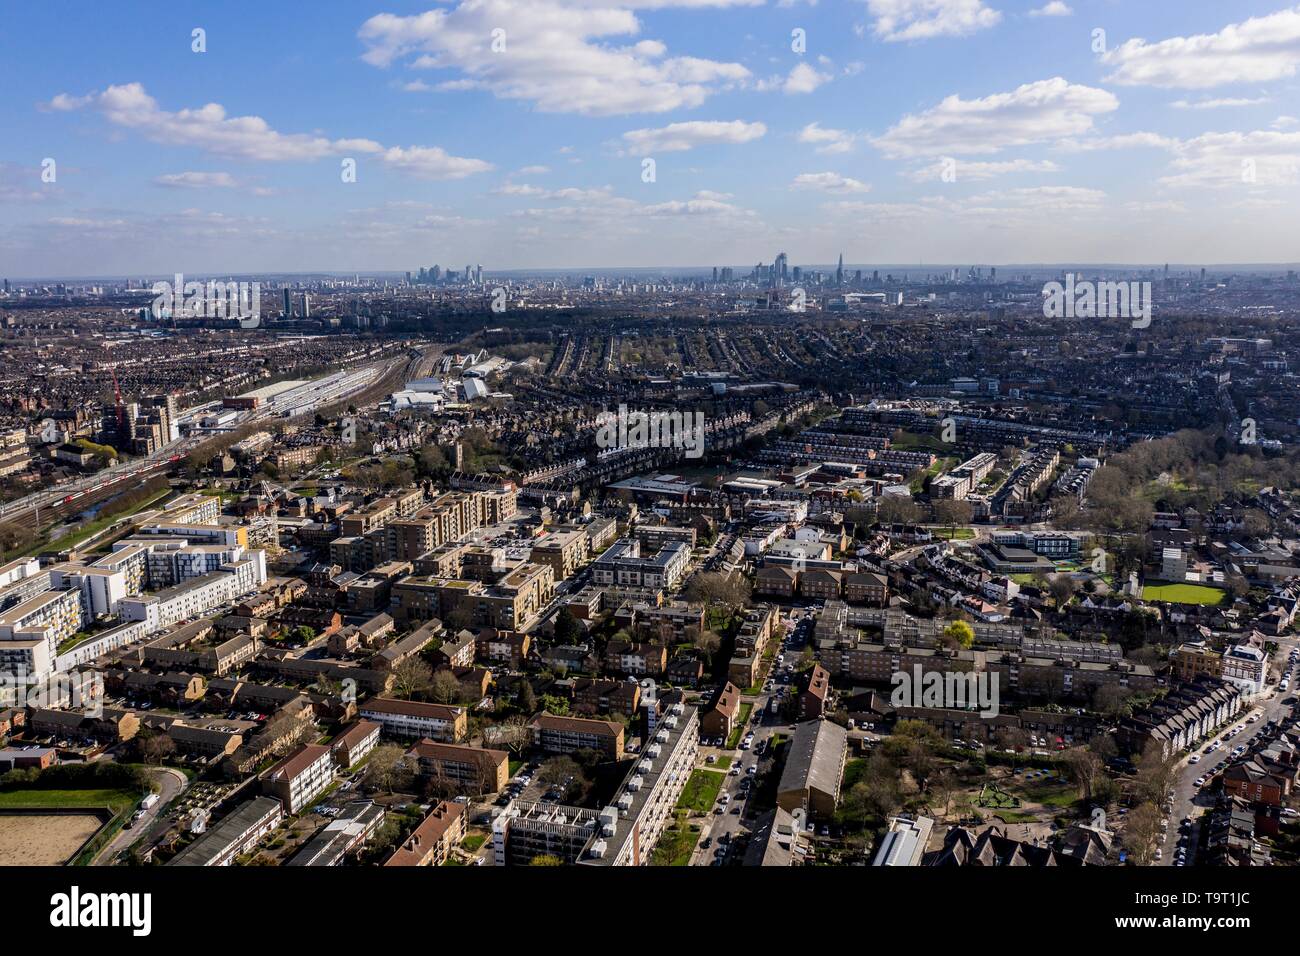 Aerial view of LONDON, England from Hampstead Heath on a Spring day Stock Photo